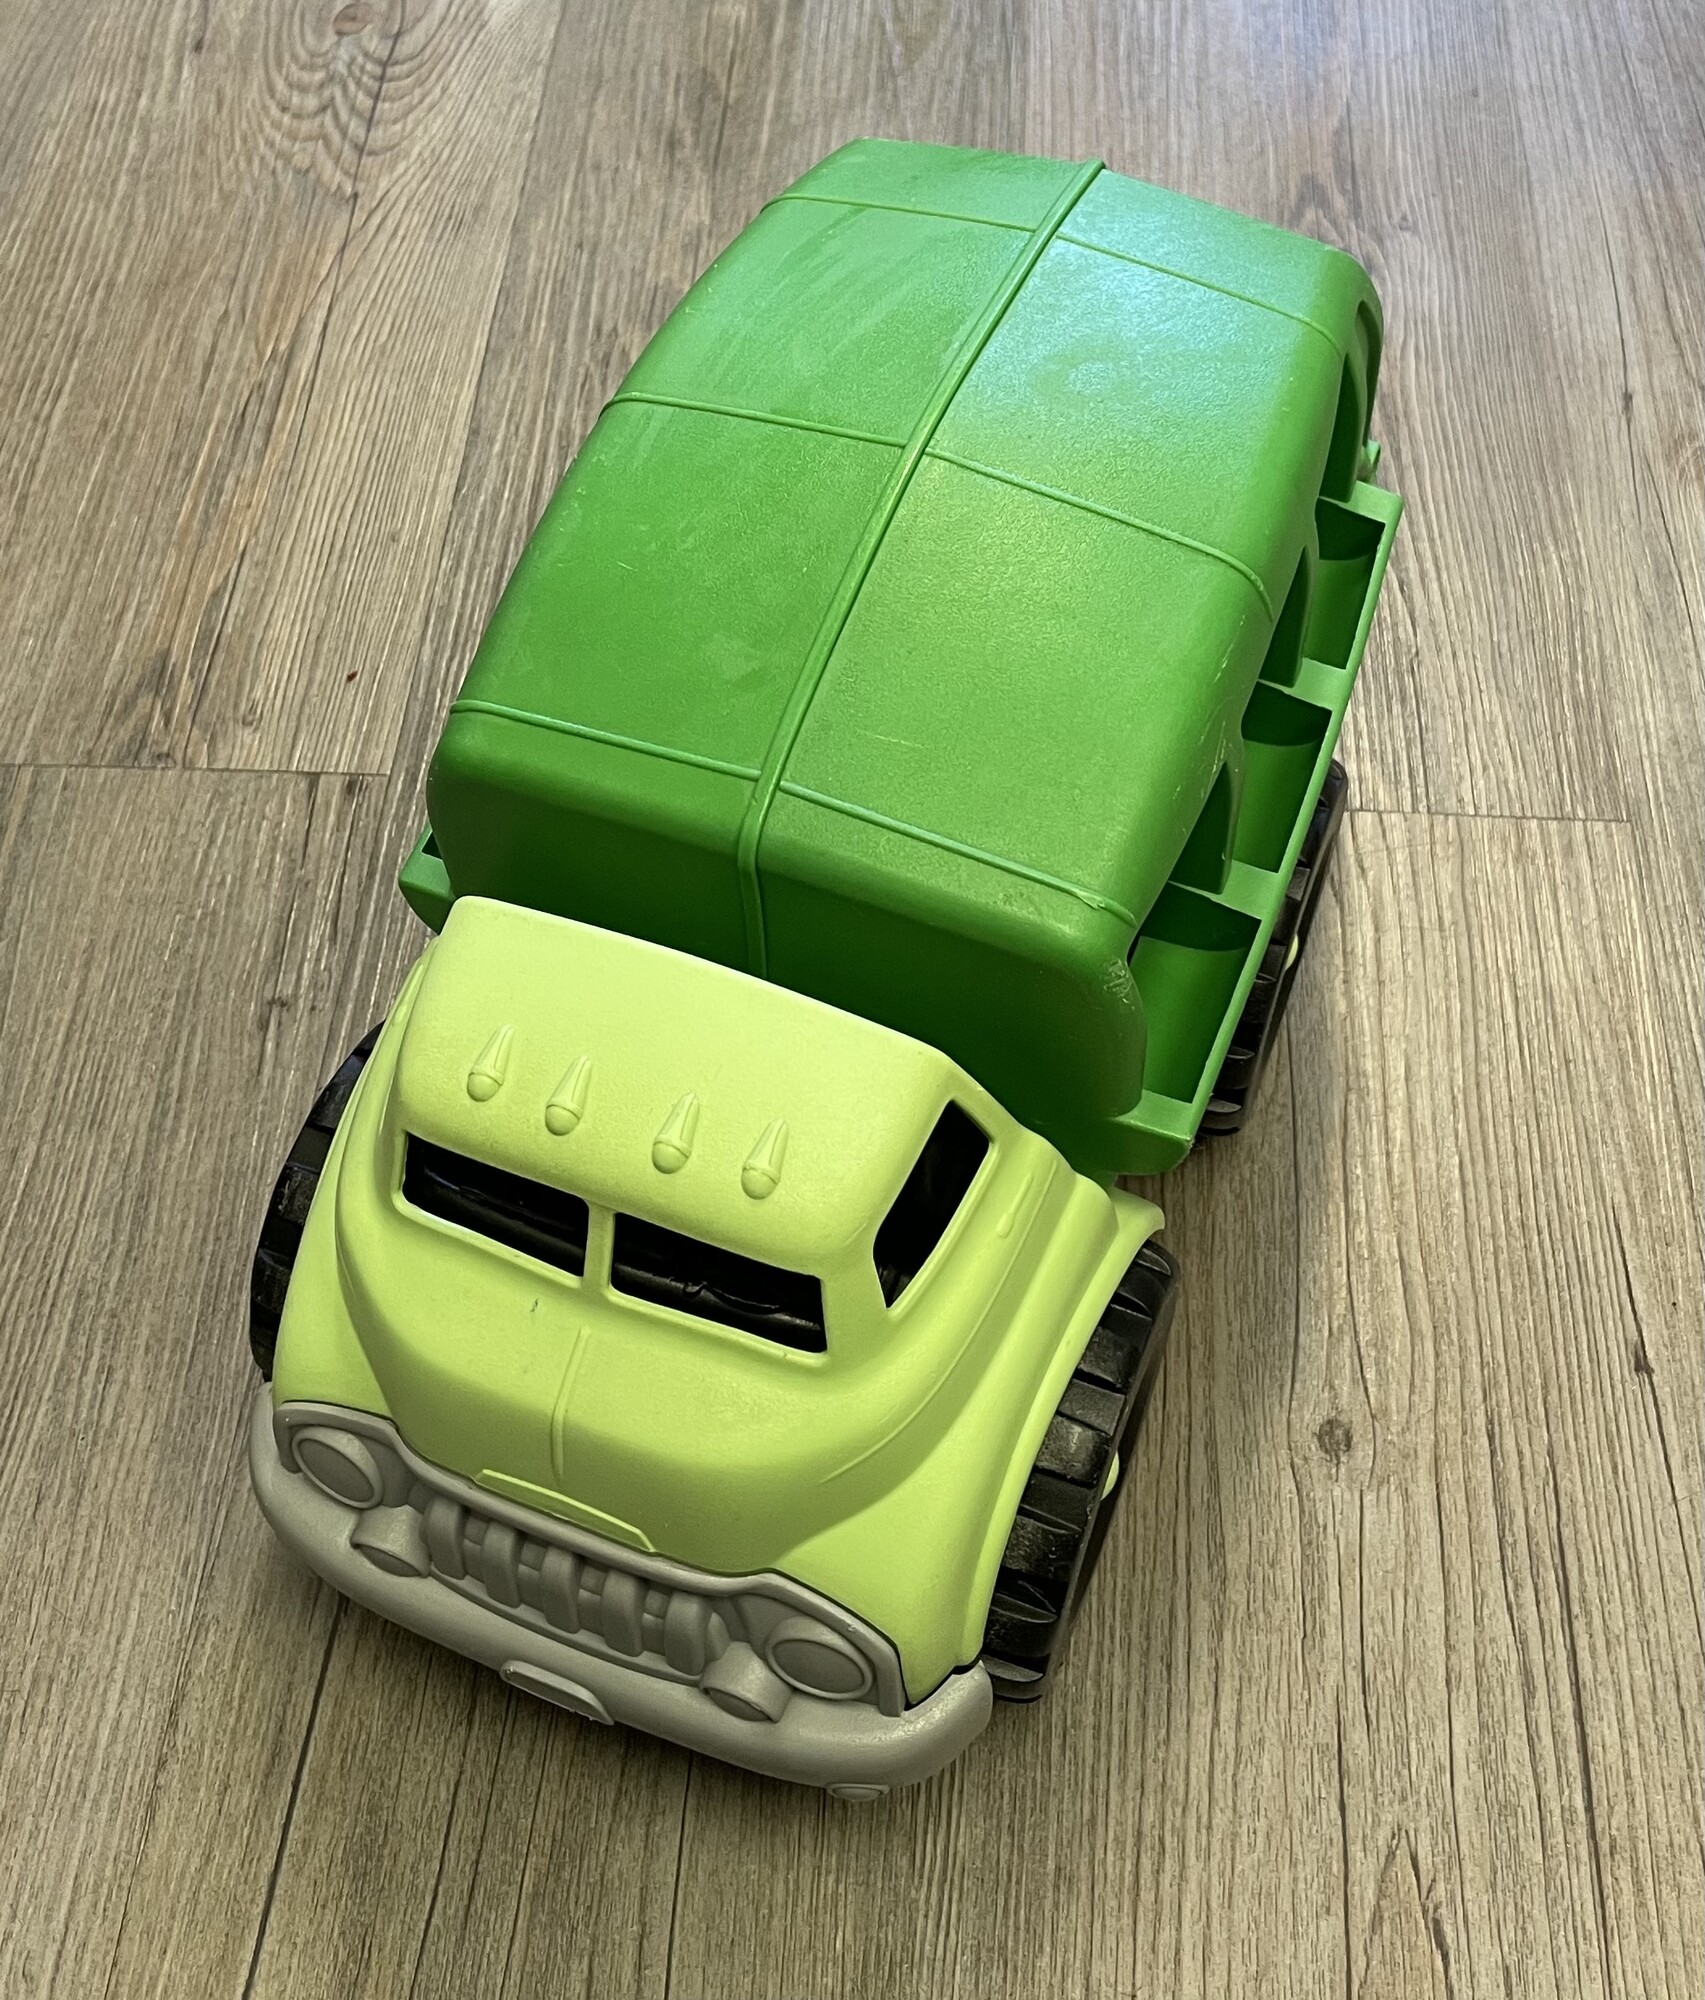 Green Toys Recycling Truck
 Green, Size: 24M